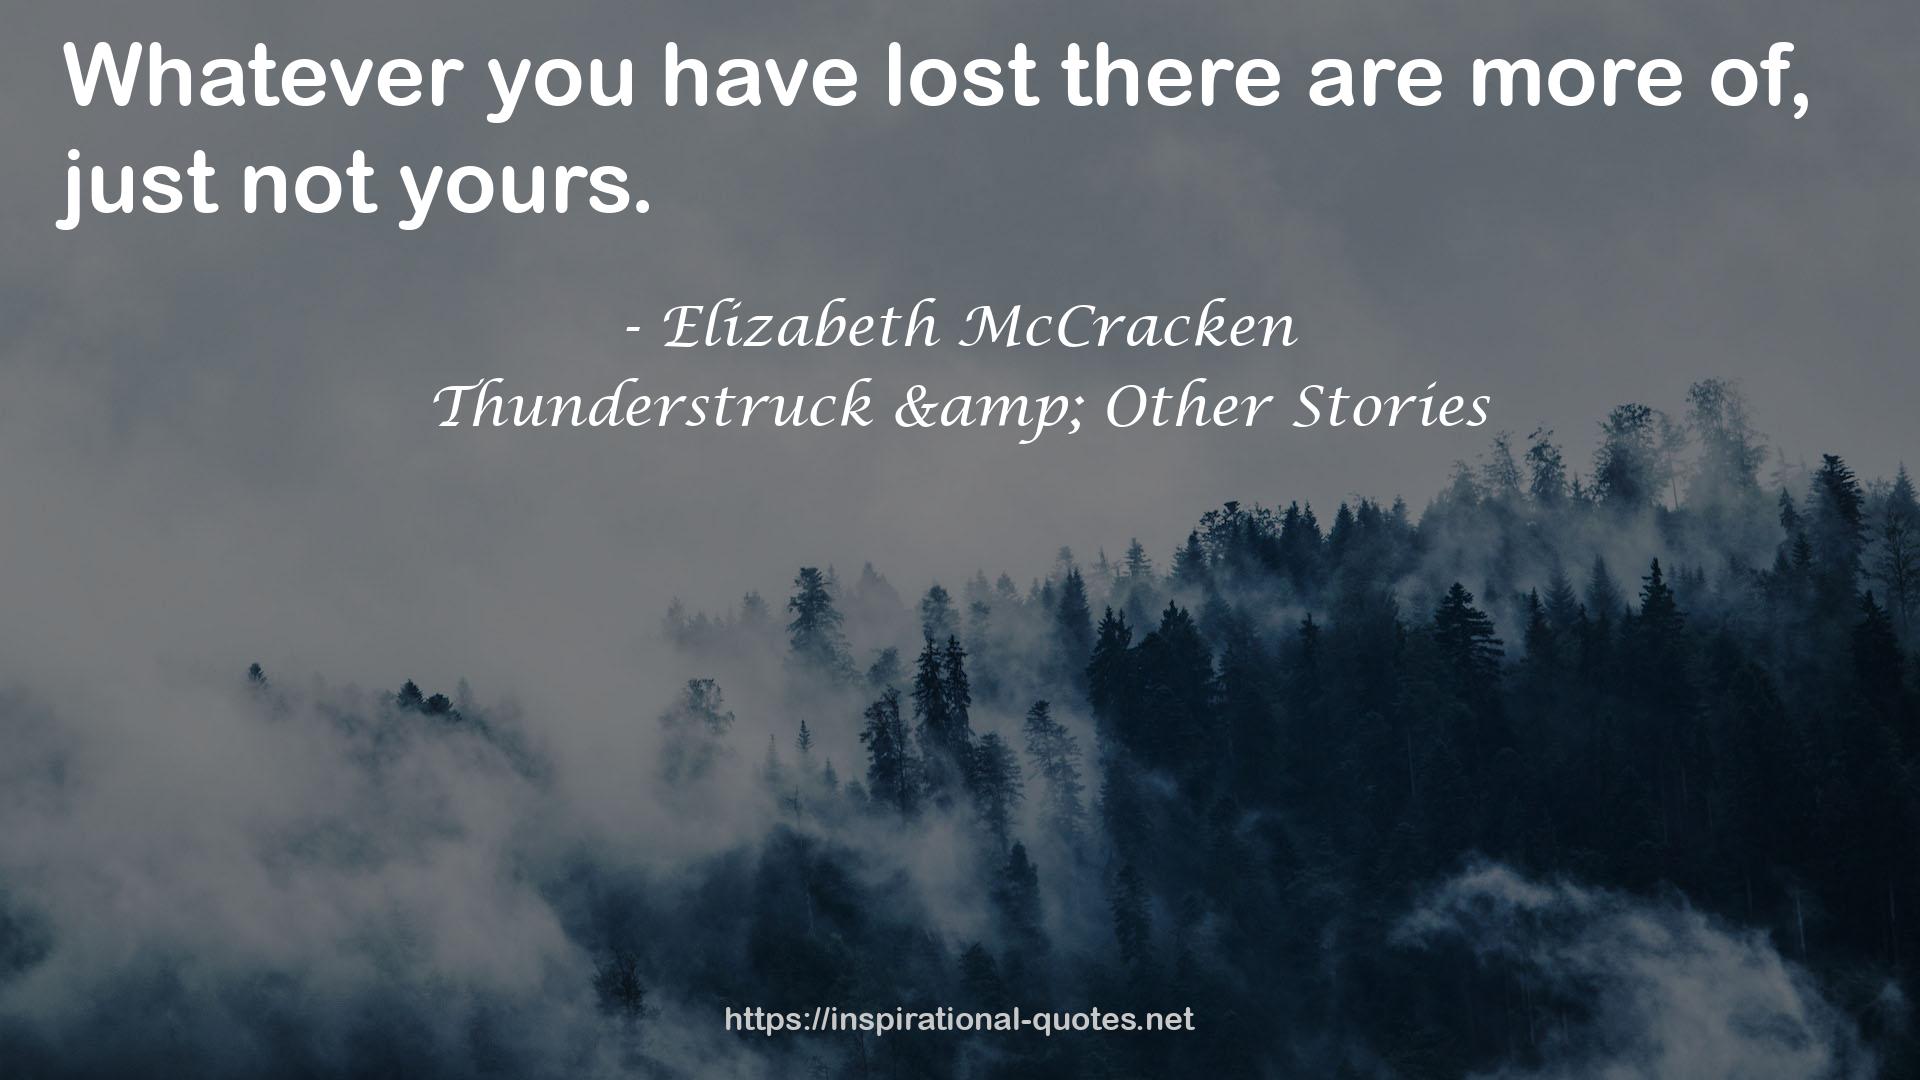 Thunderstruck & Other Stories QUOTES